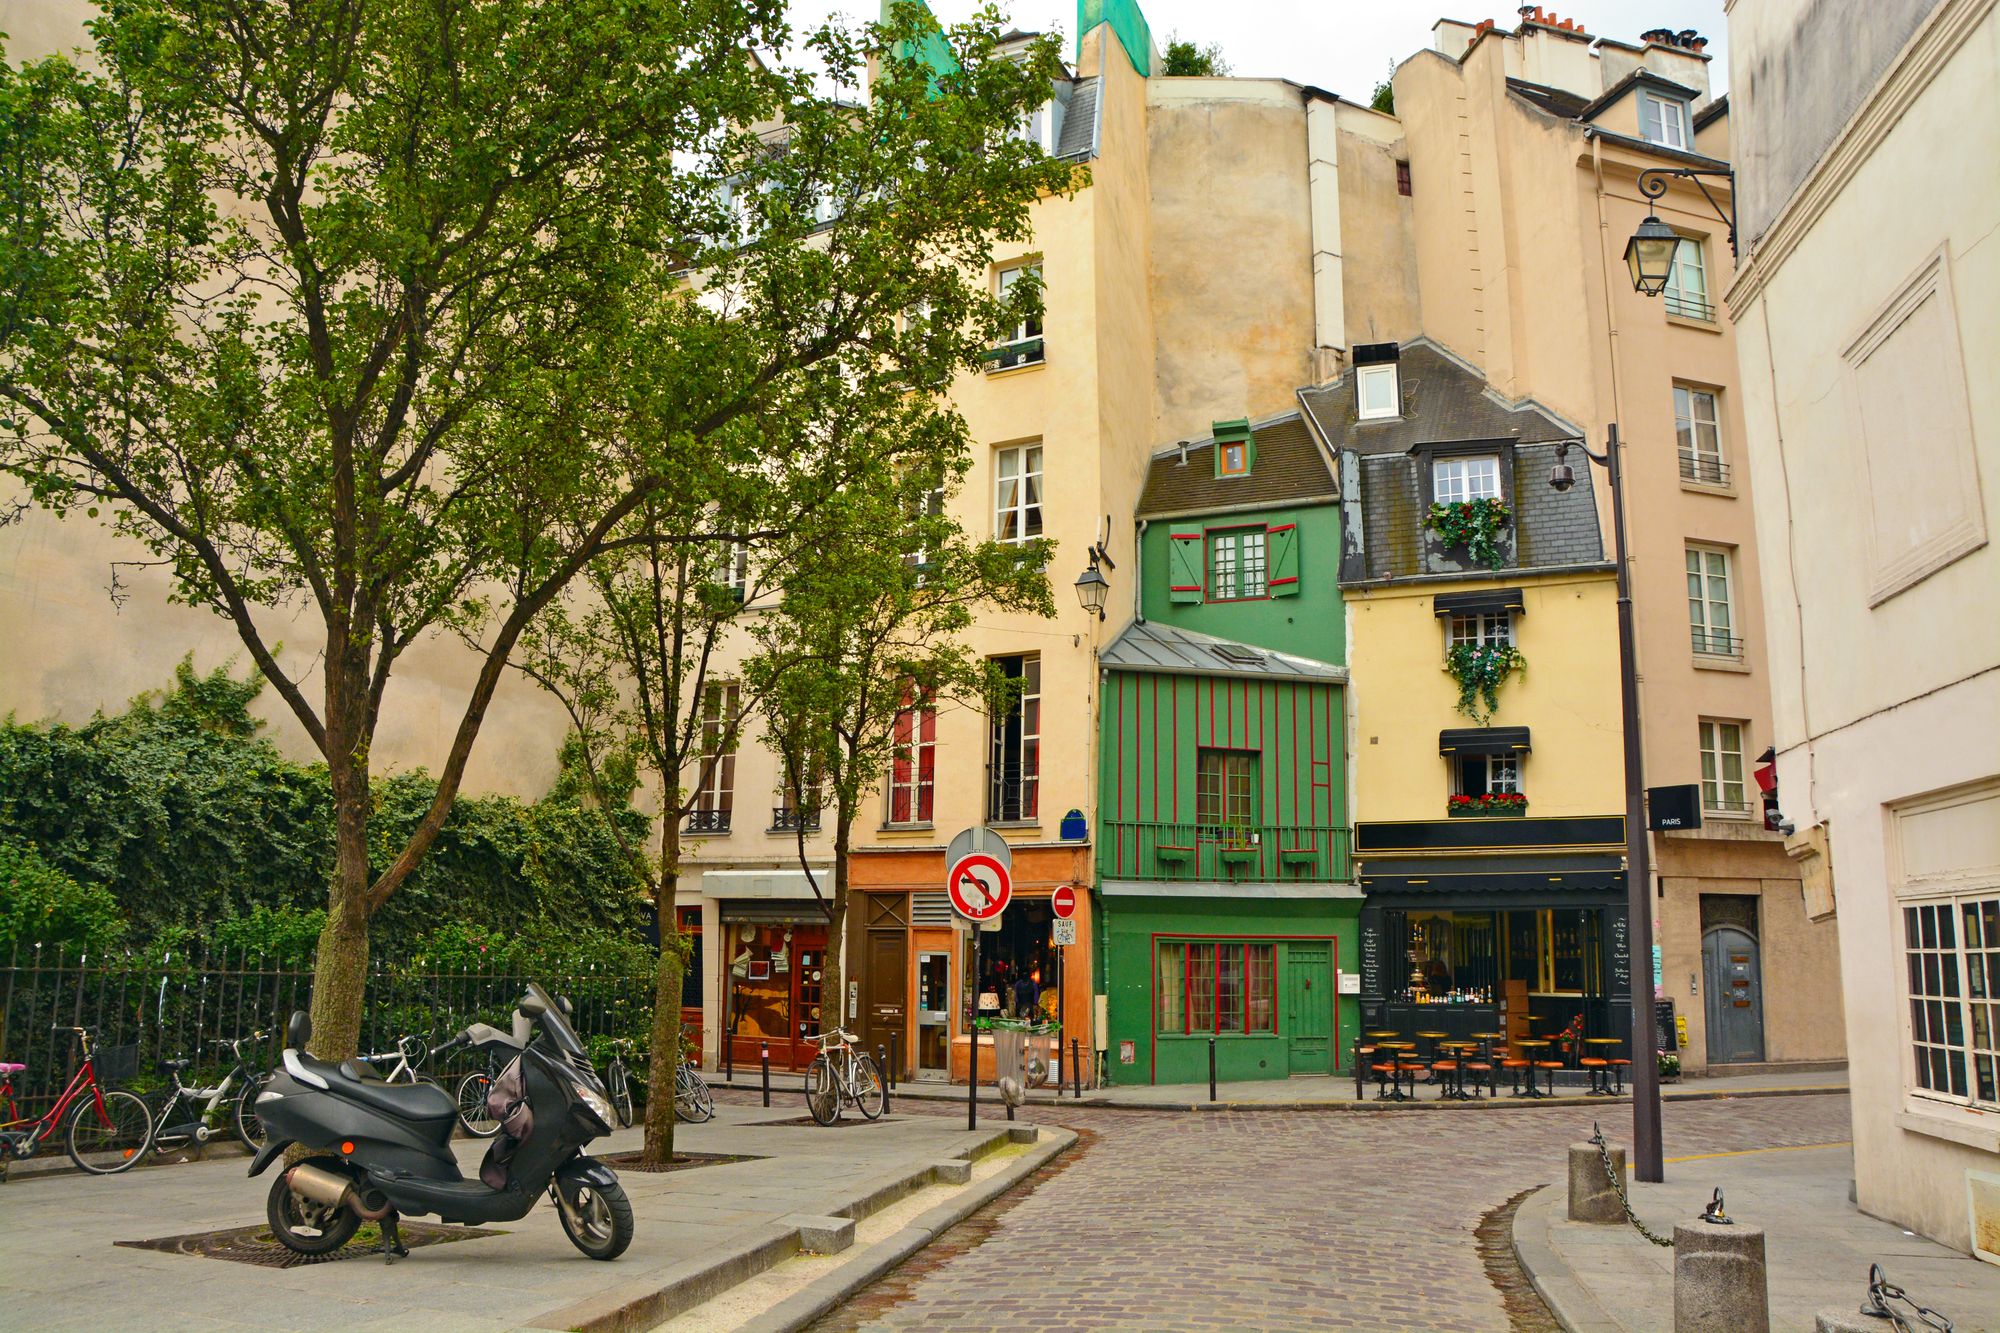 A photo of a street view in the Latin Quarter.